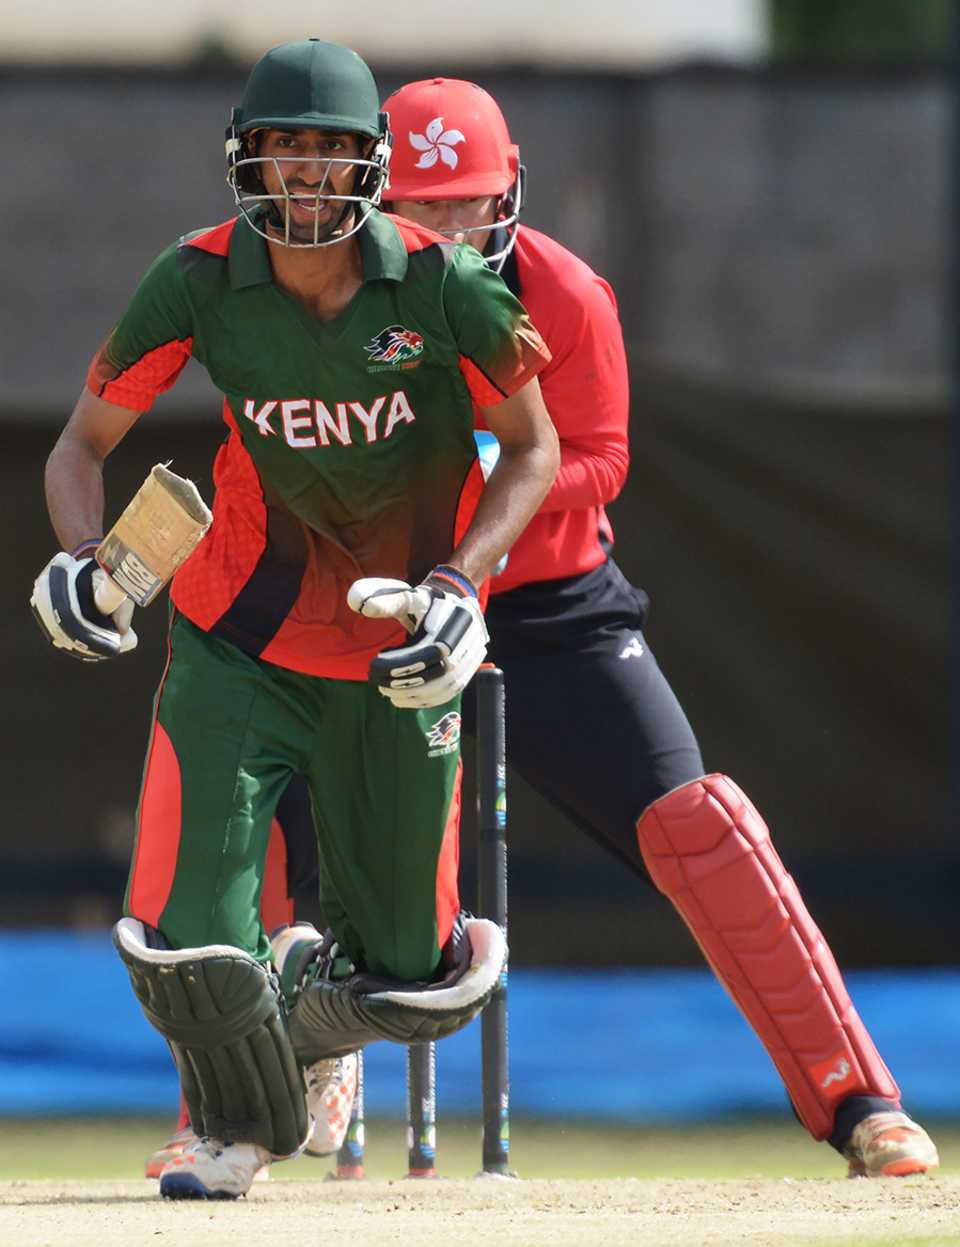 Irfan Karim anchored Kenya's chase with a knock of 67 at the top of the order